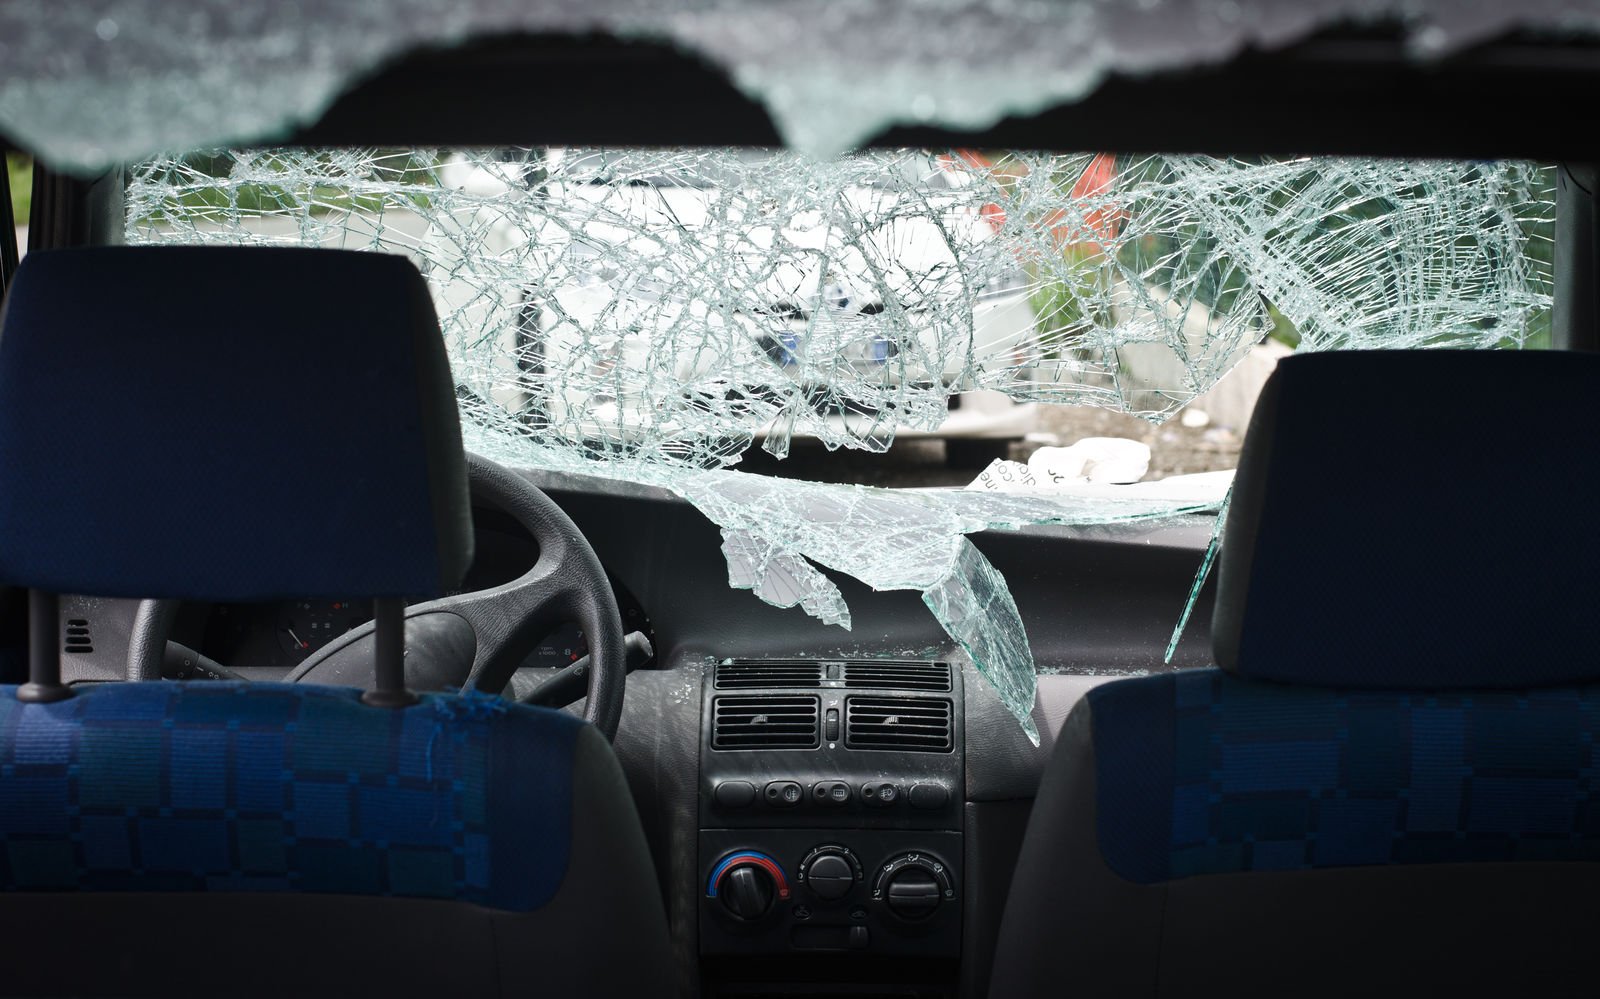 shattered windshield from view inside of the a car